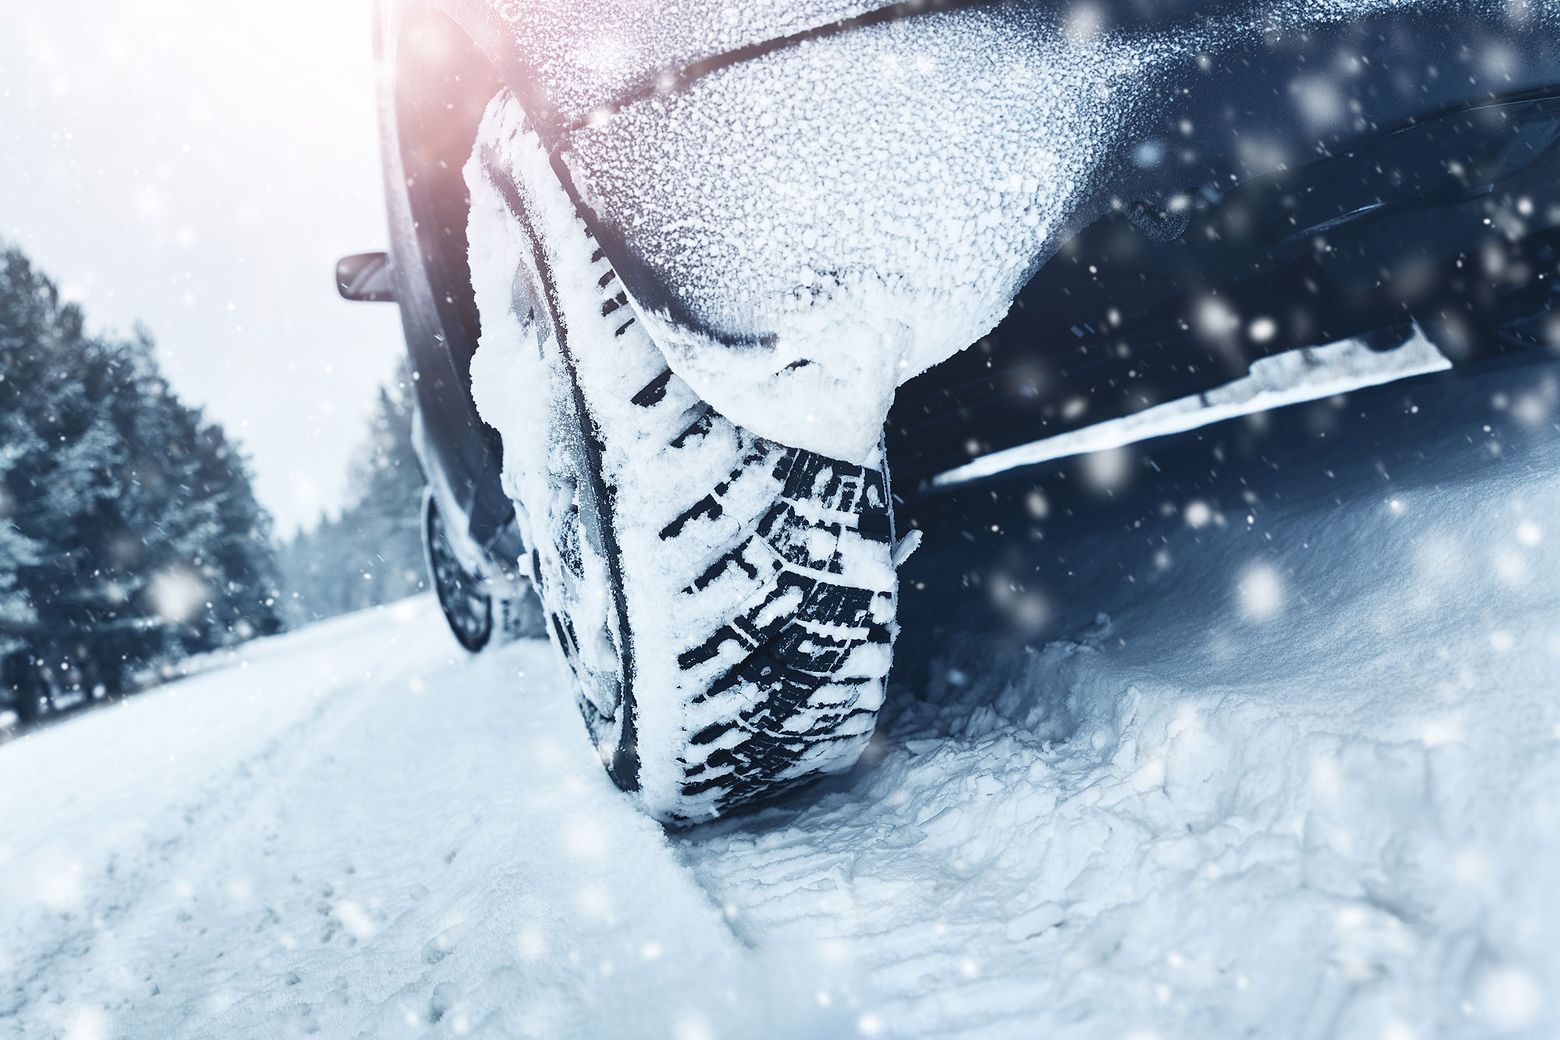 Winter is coming. It's time to prepare your car for the cold.